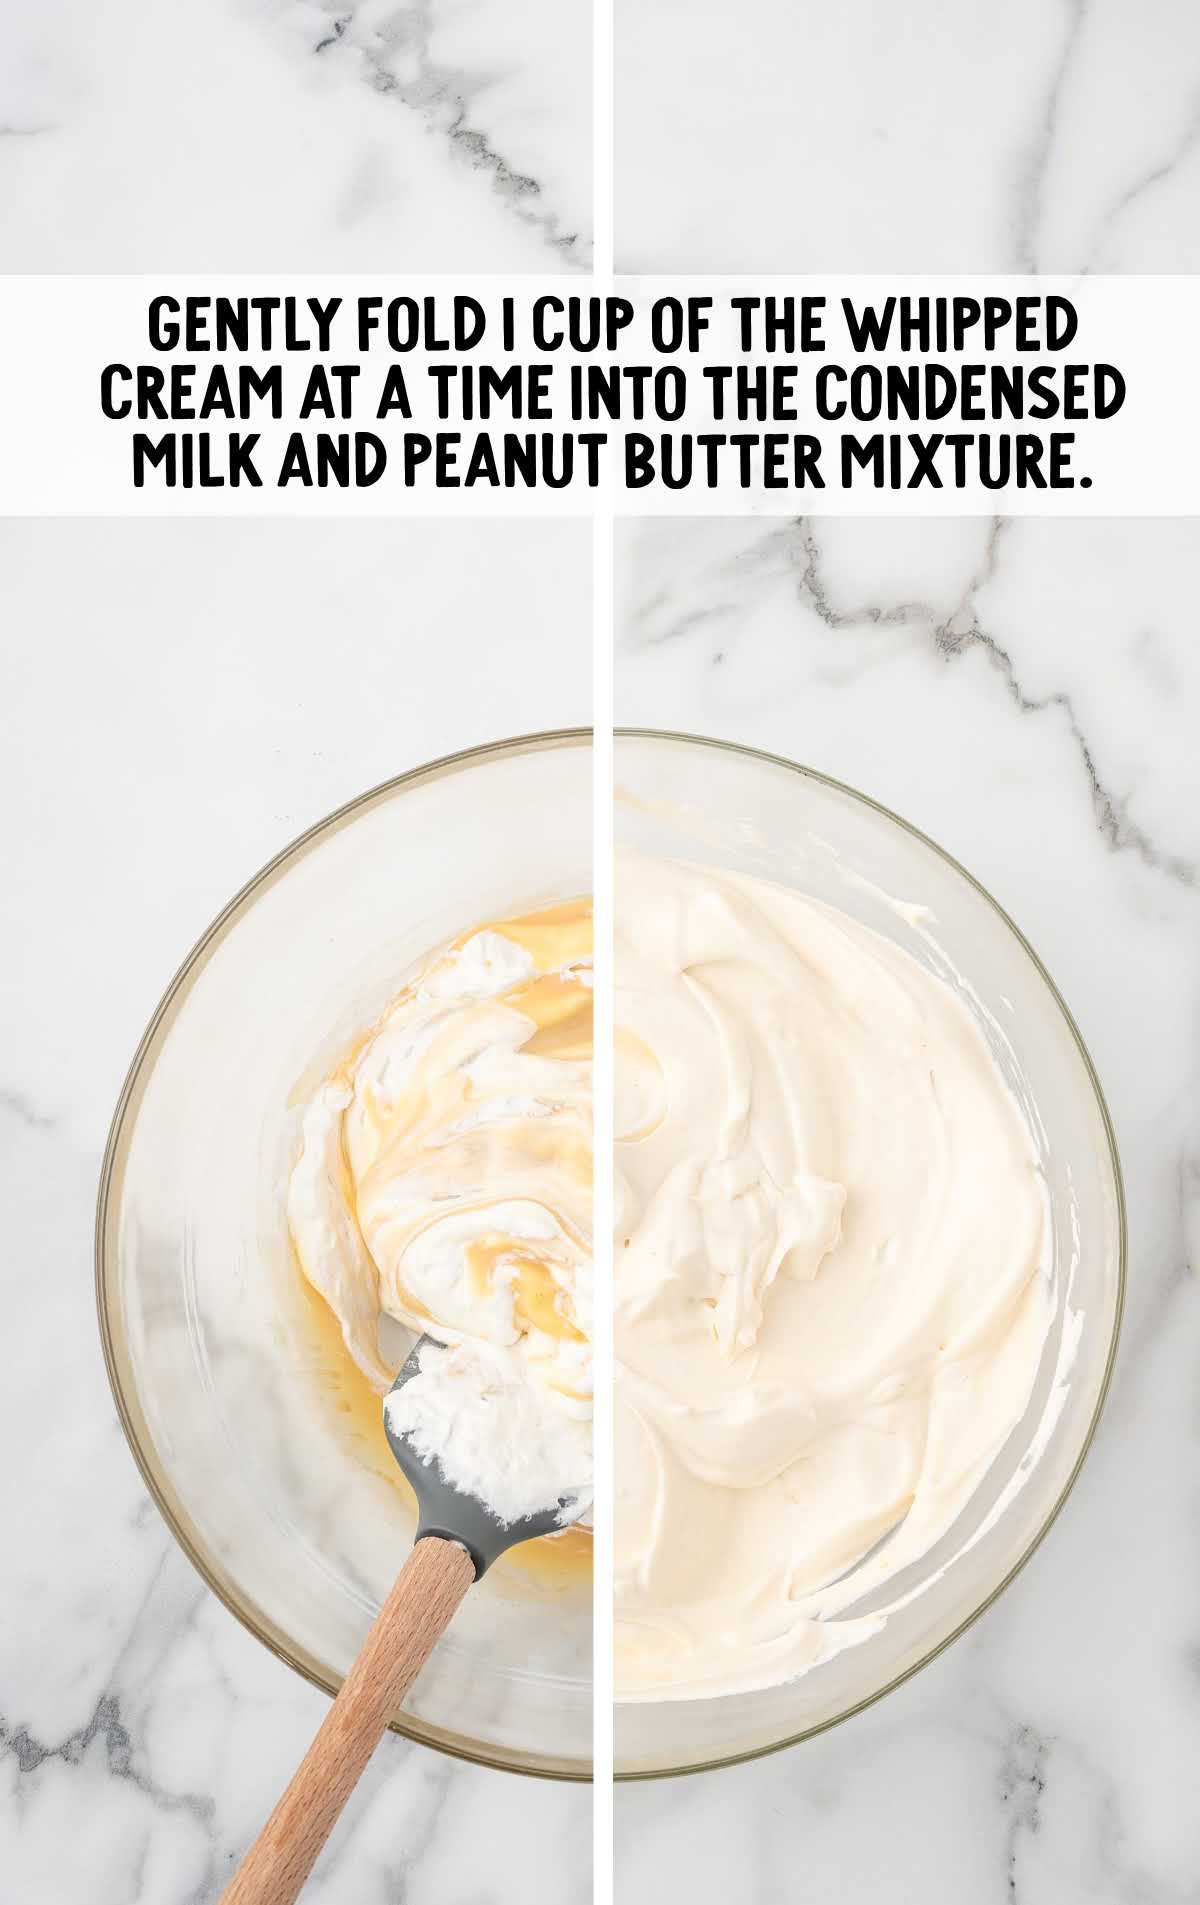 whipped cream folded into the peanut butter mixture